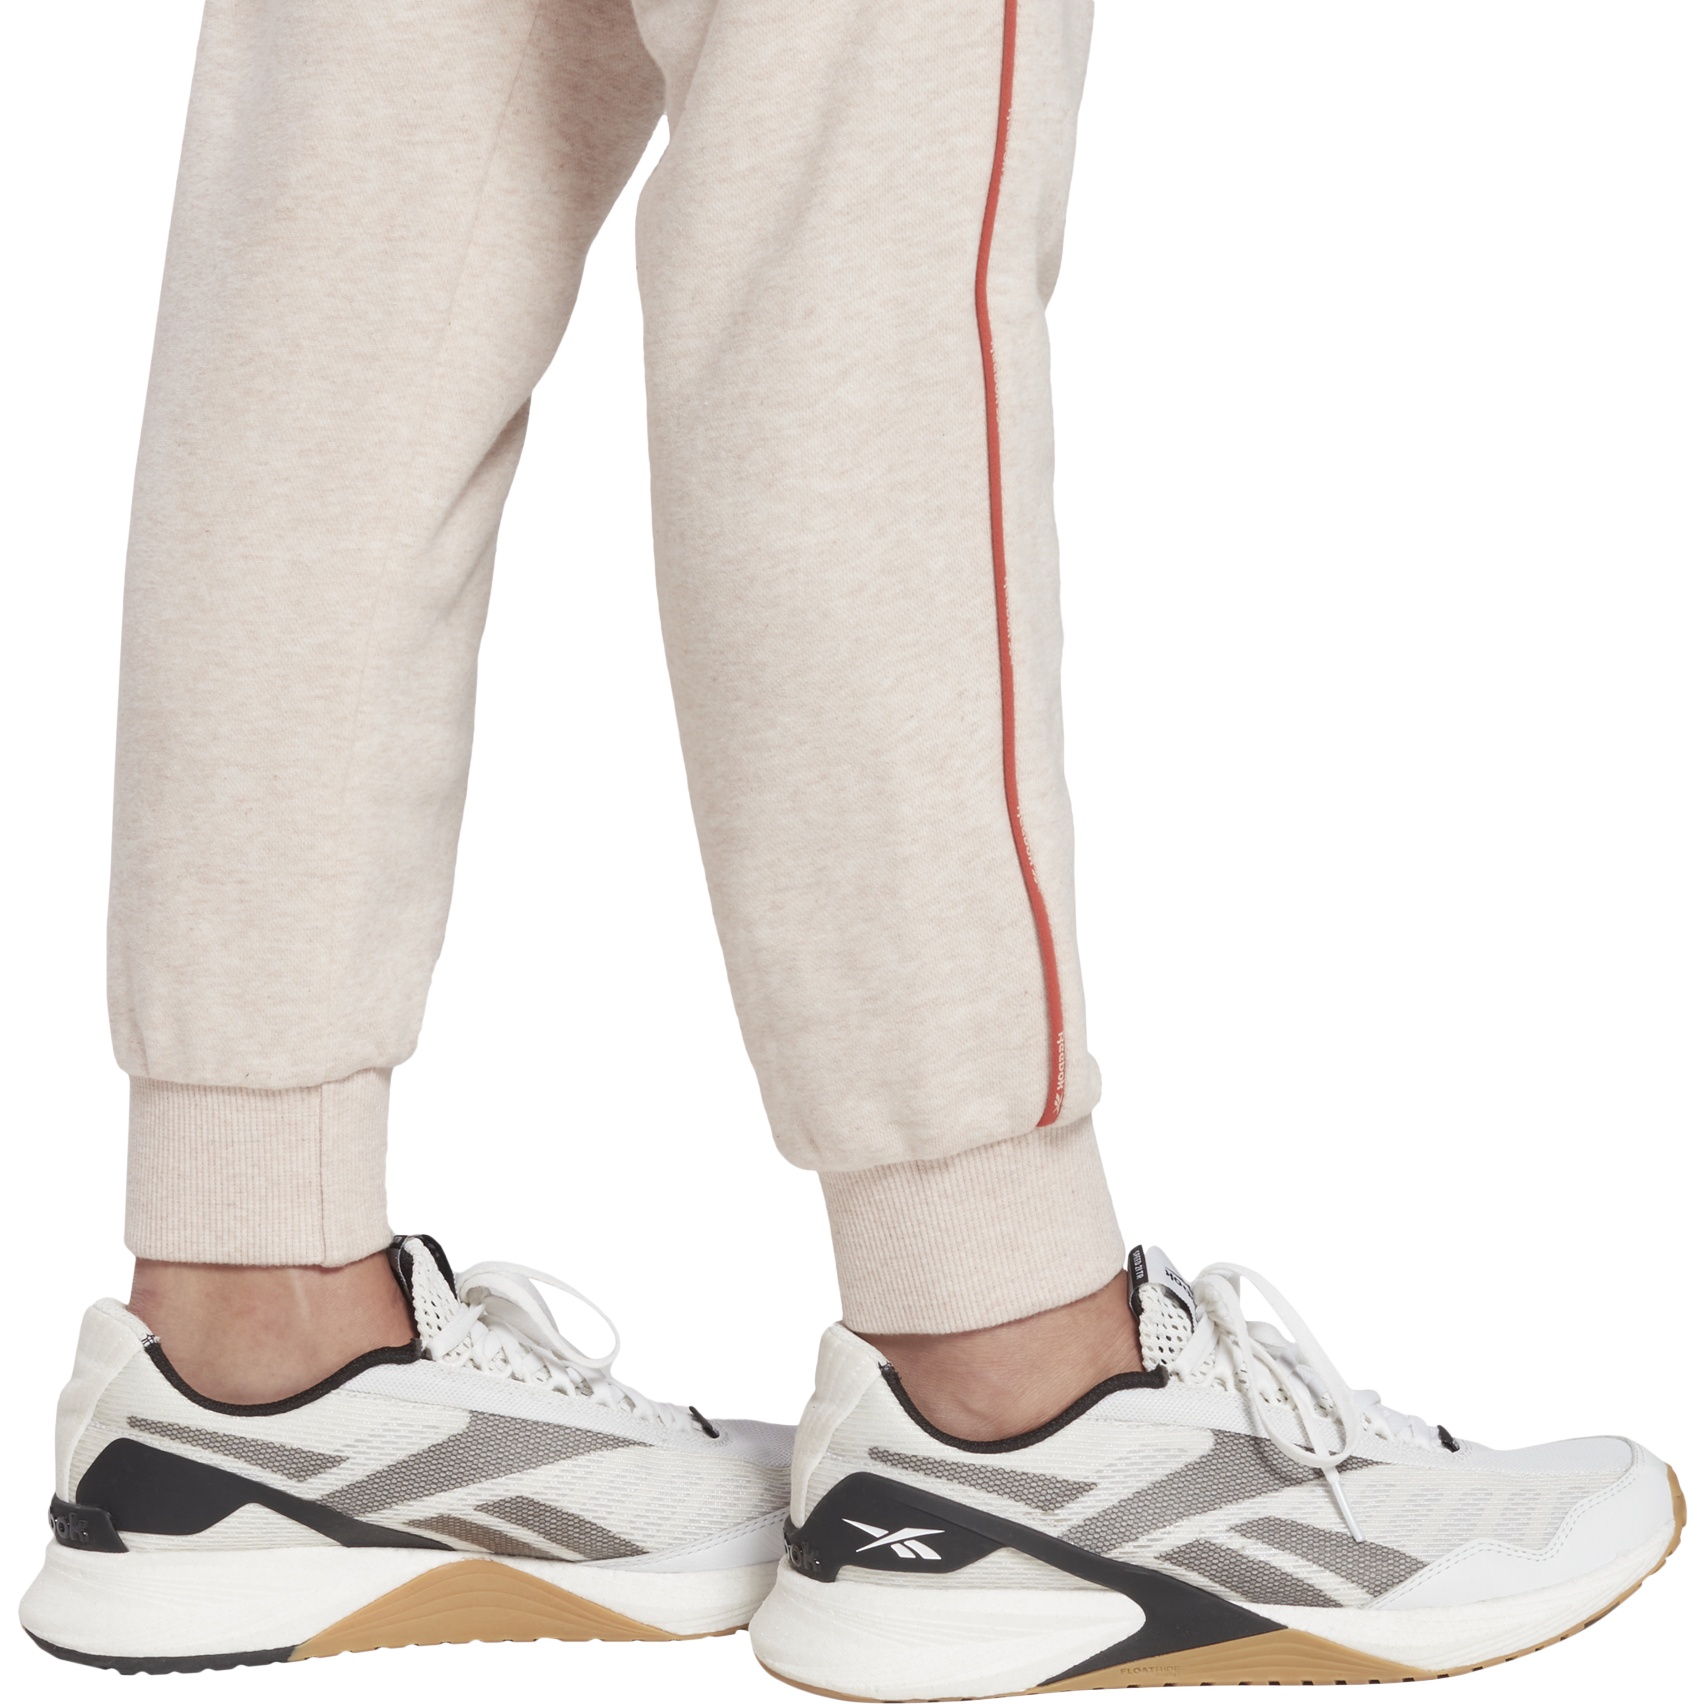 Grey Reebok Piping Jogger - Get The Label